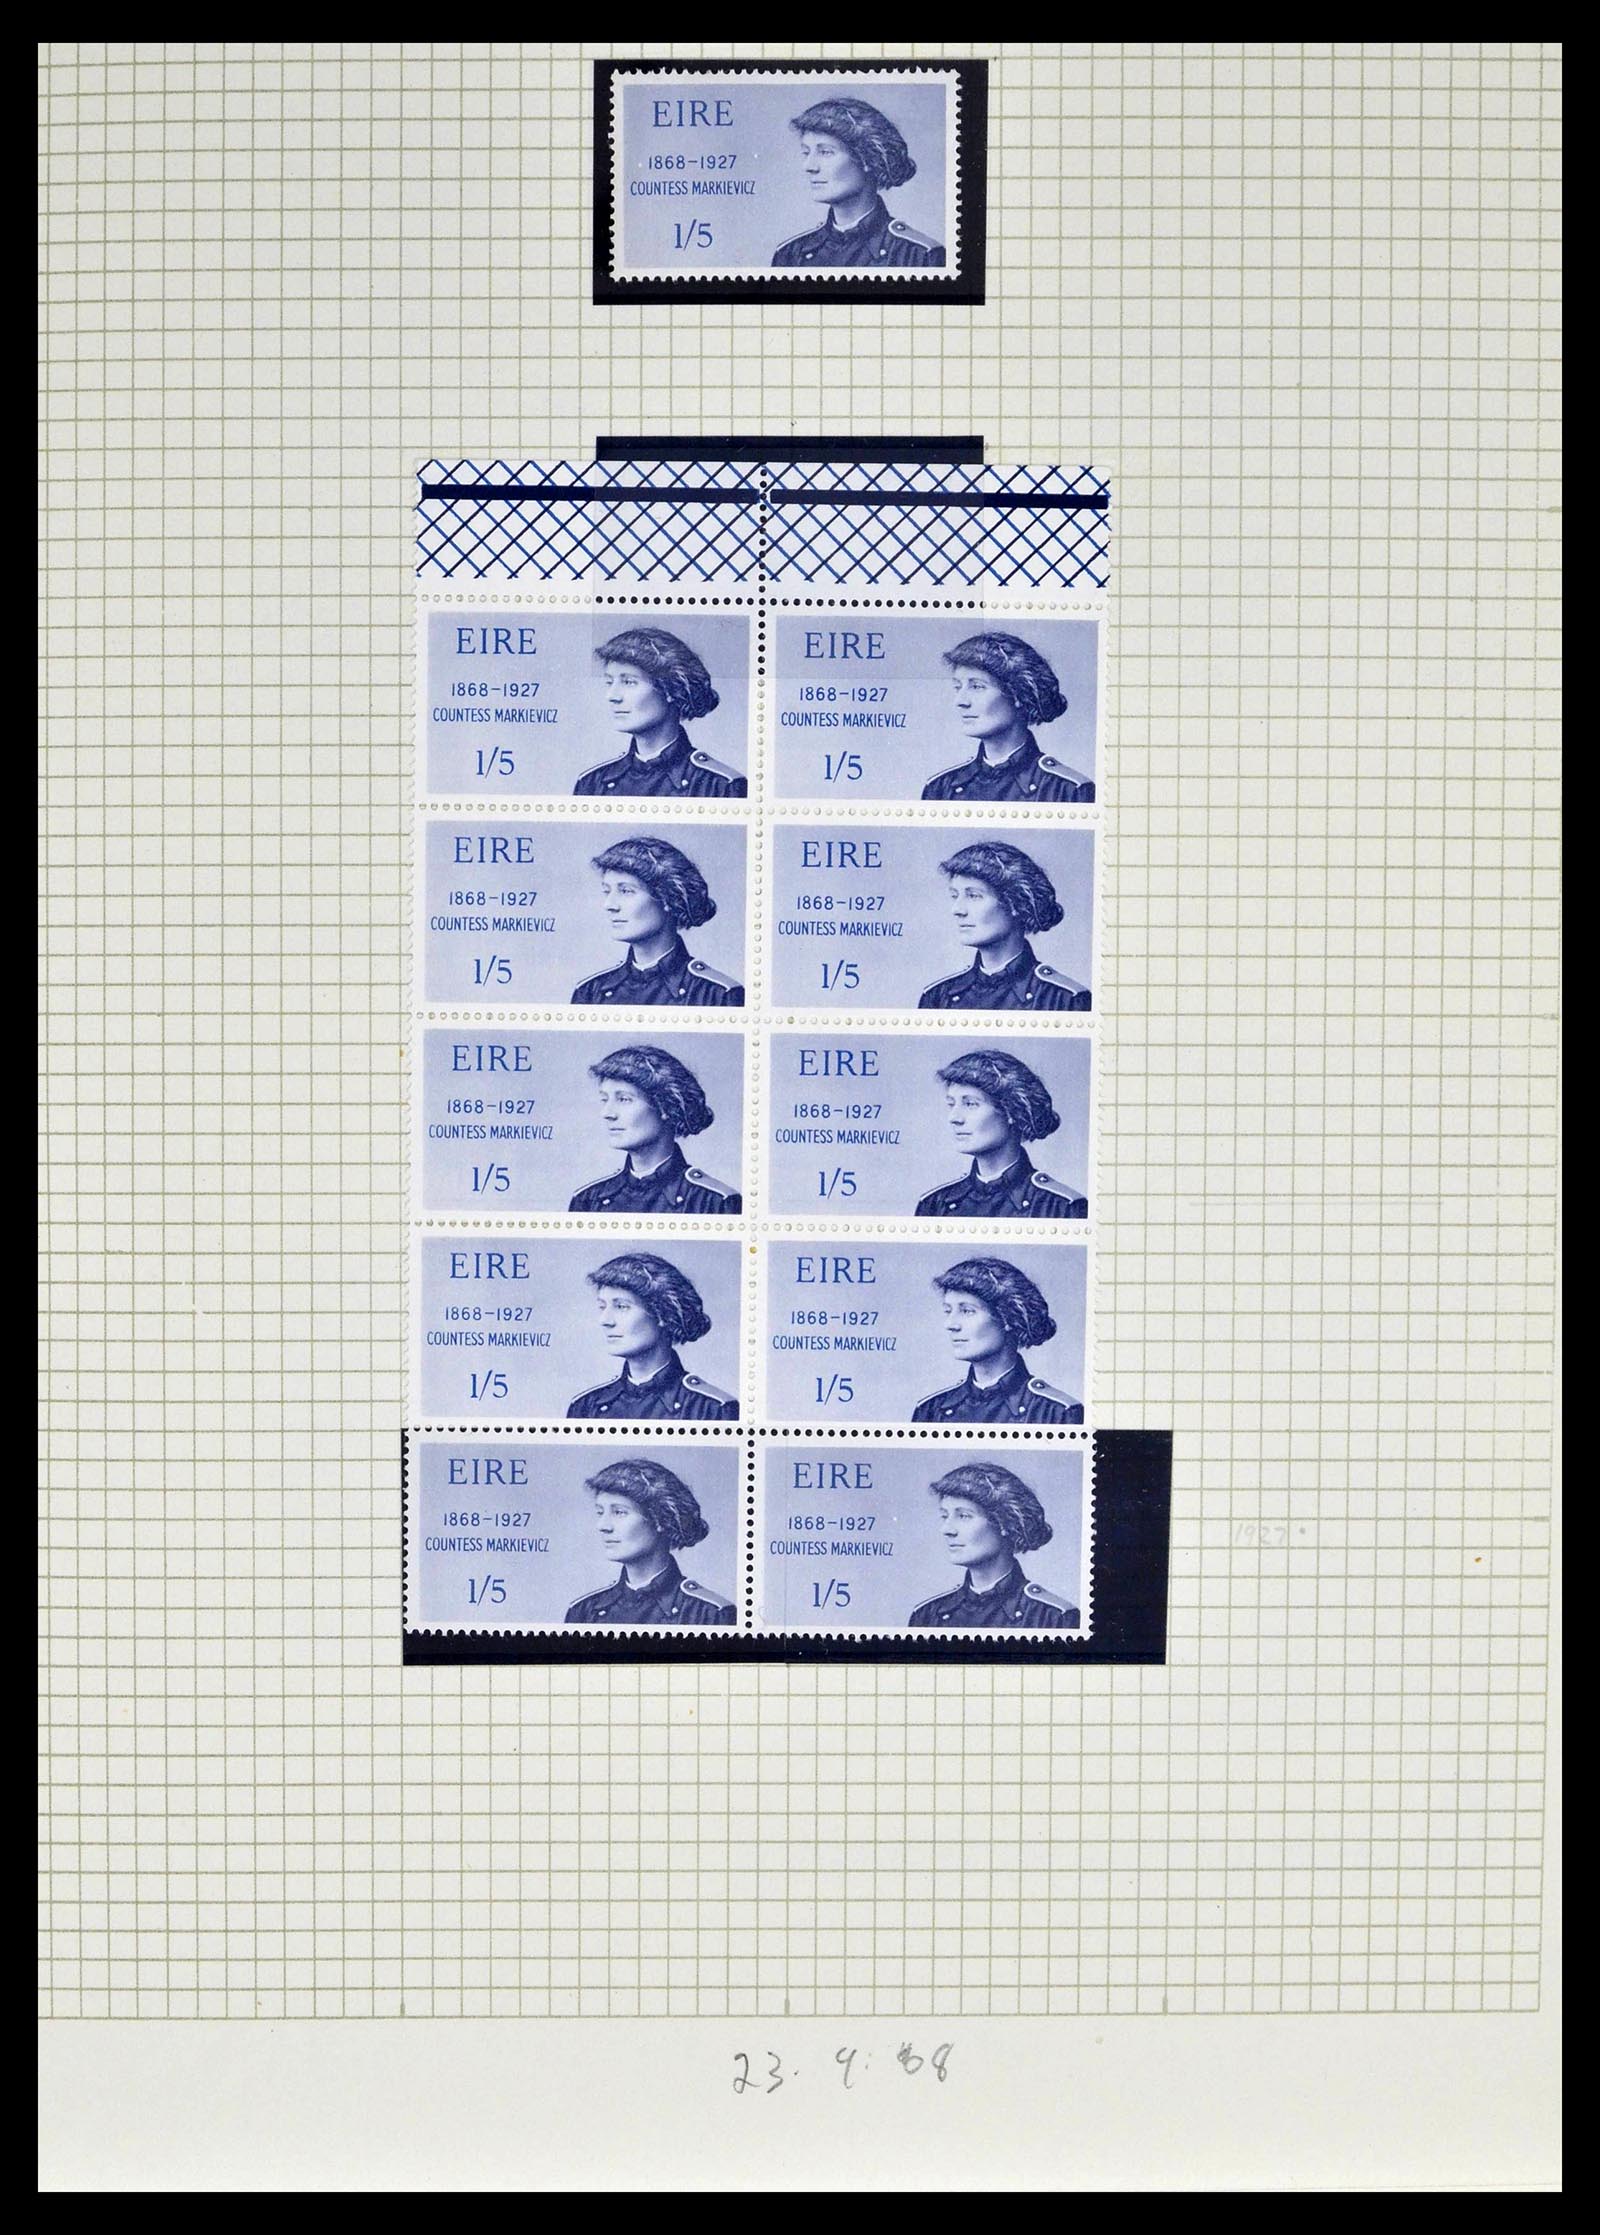 39272 0009 - Stamp collection 39272 Ireland plateflaws and varities 1963-1981.